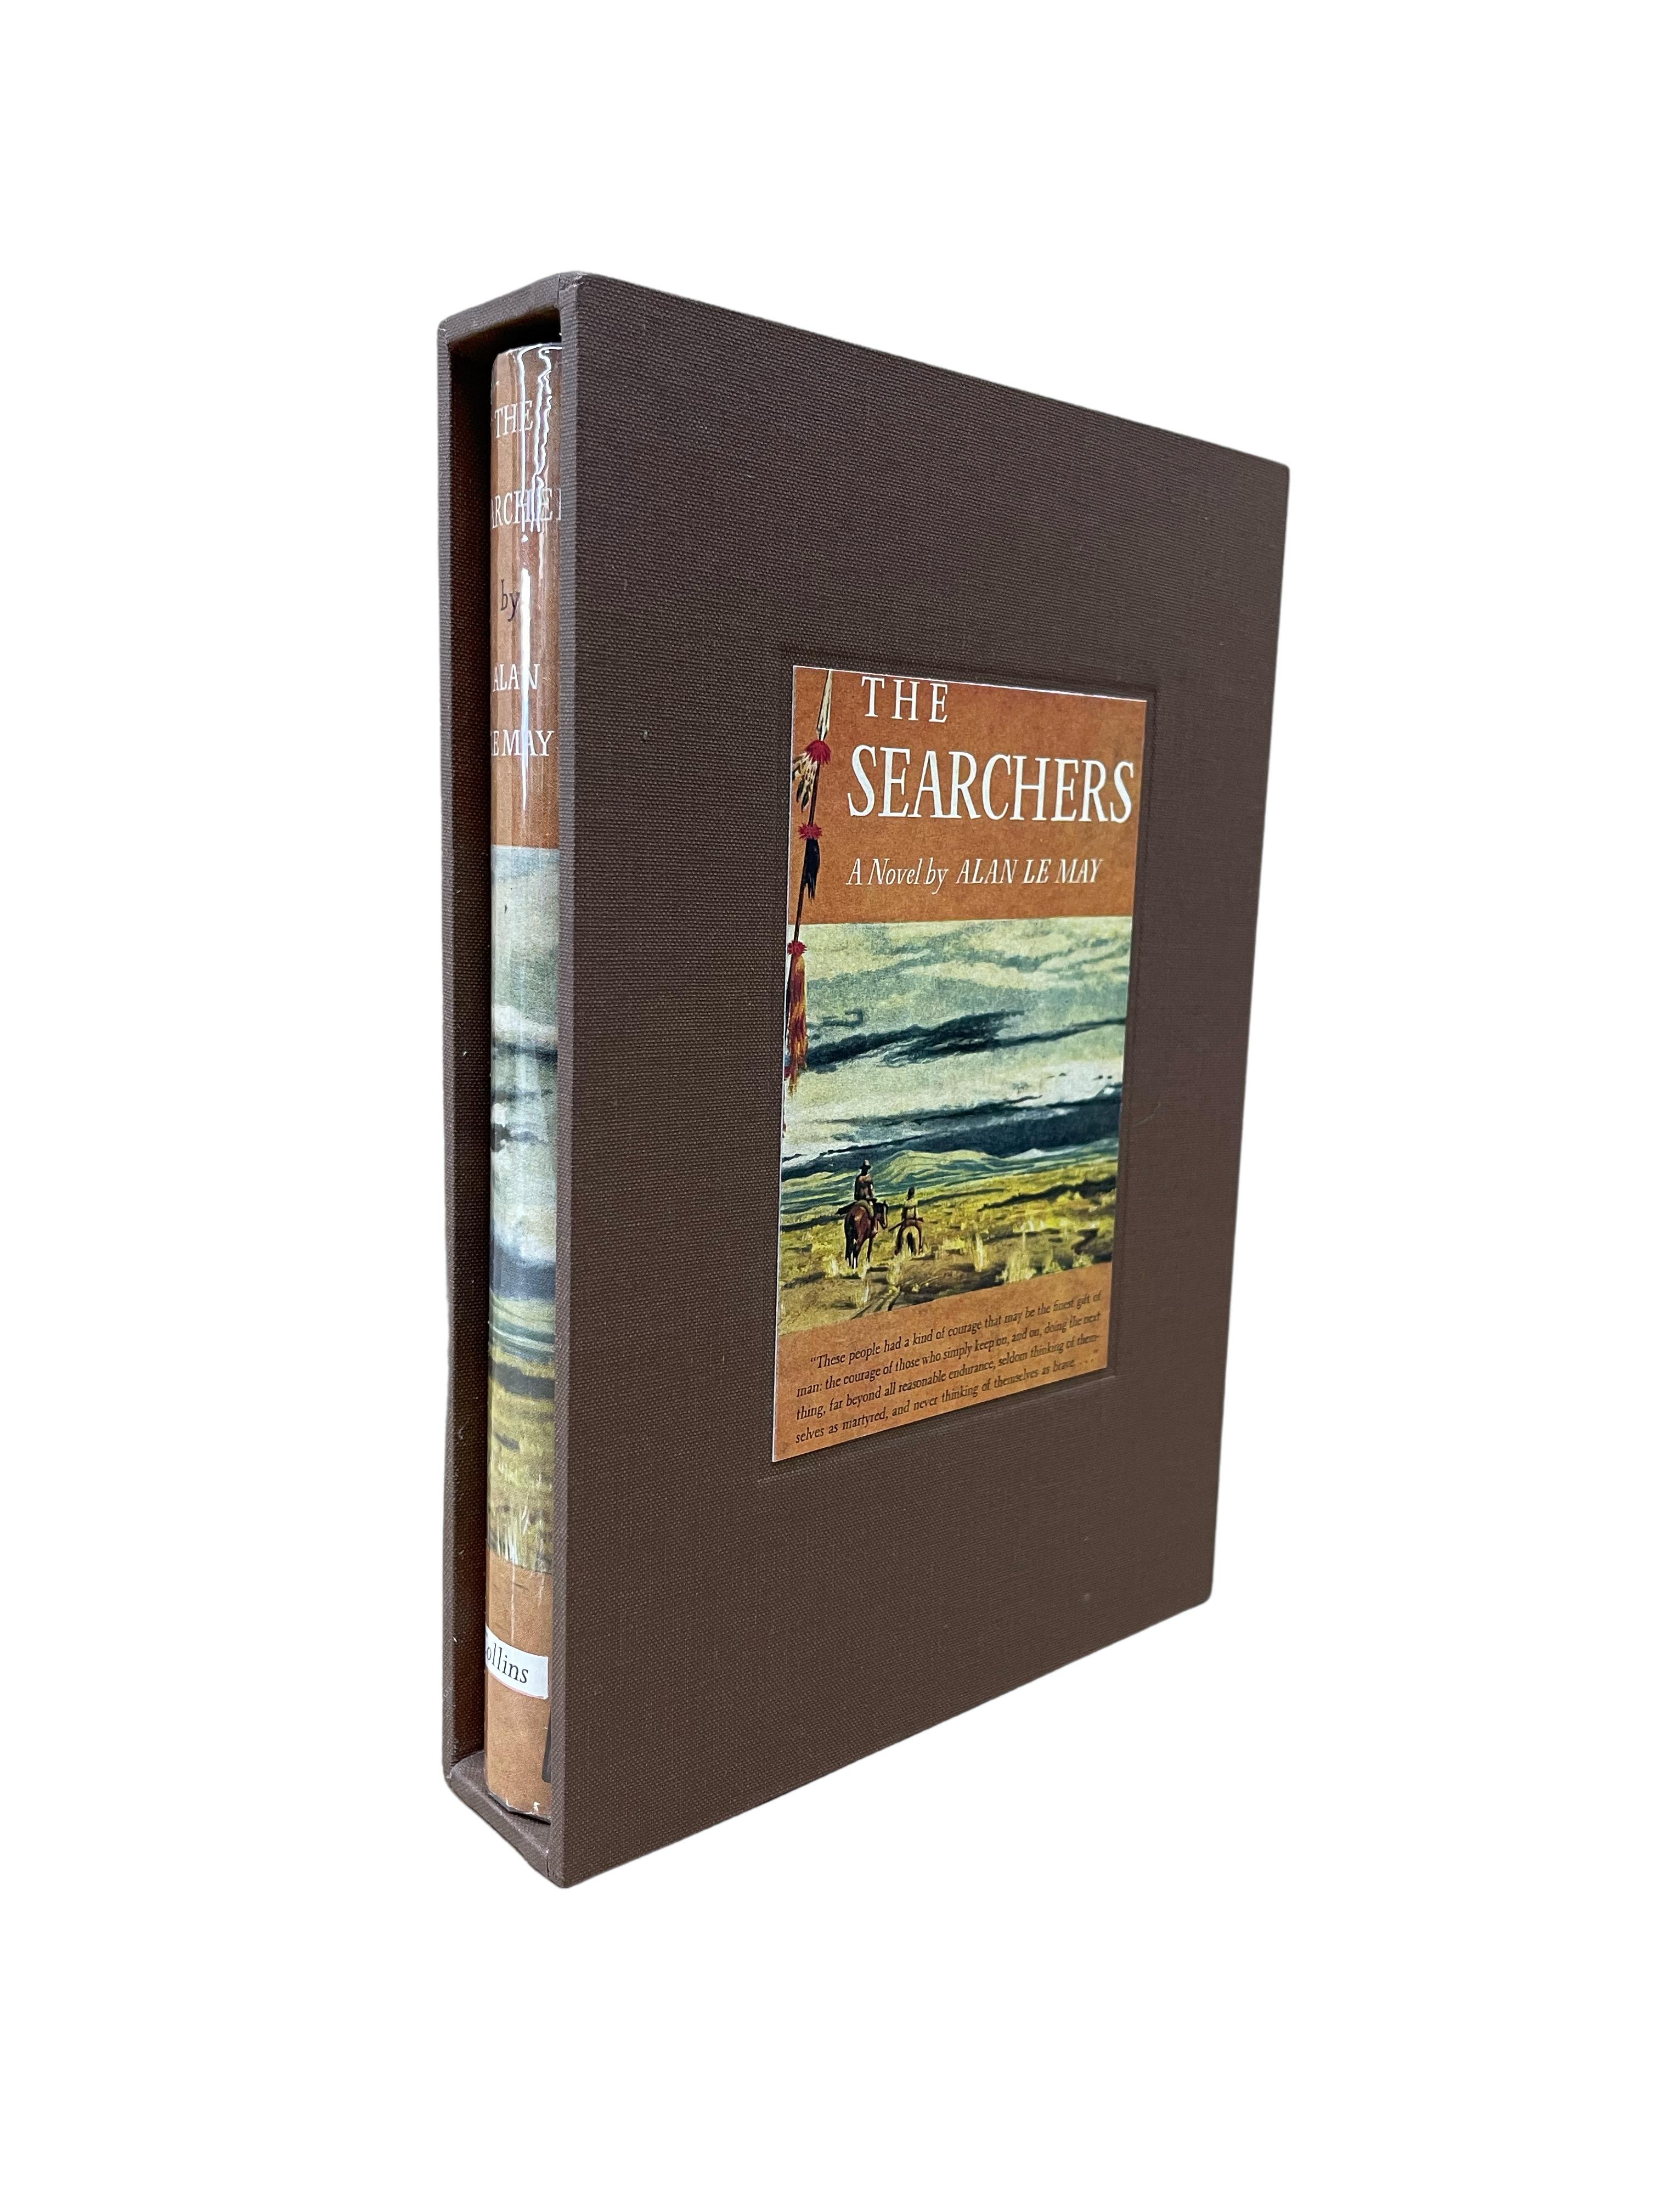 Le May, Alan. The Searchers: A Novel. London: Collins, 1955. First British edition. Octavo. In the publisher's blue hardboards and original uncliped pictorial dust jacket. With new archival cloth slipcase.

This is a first British edition printing